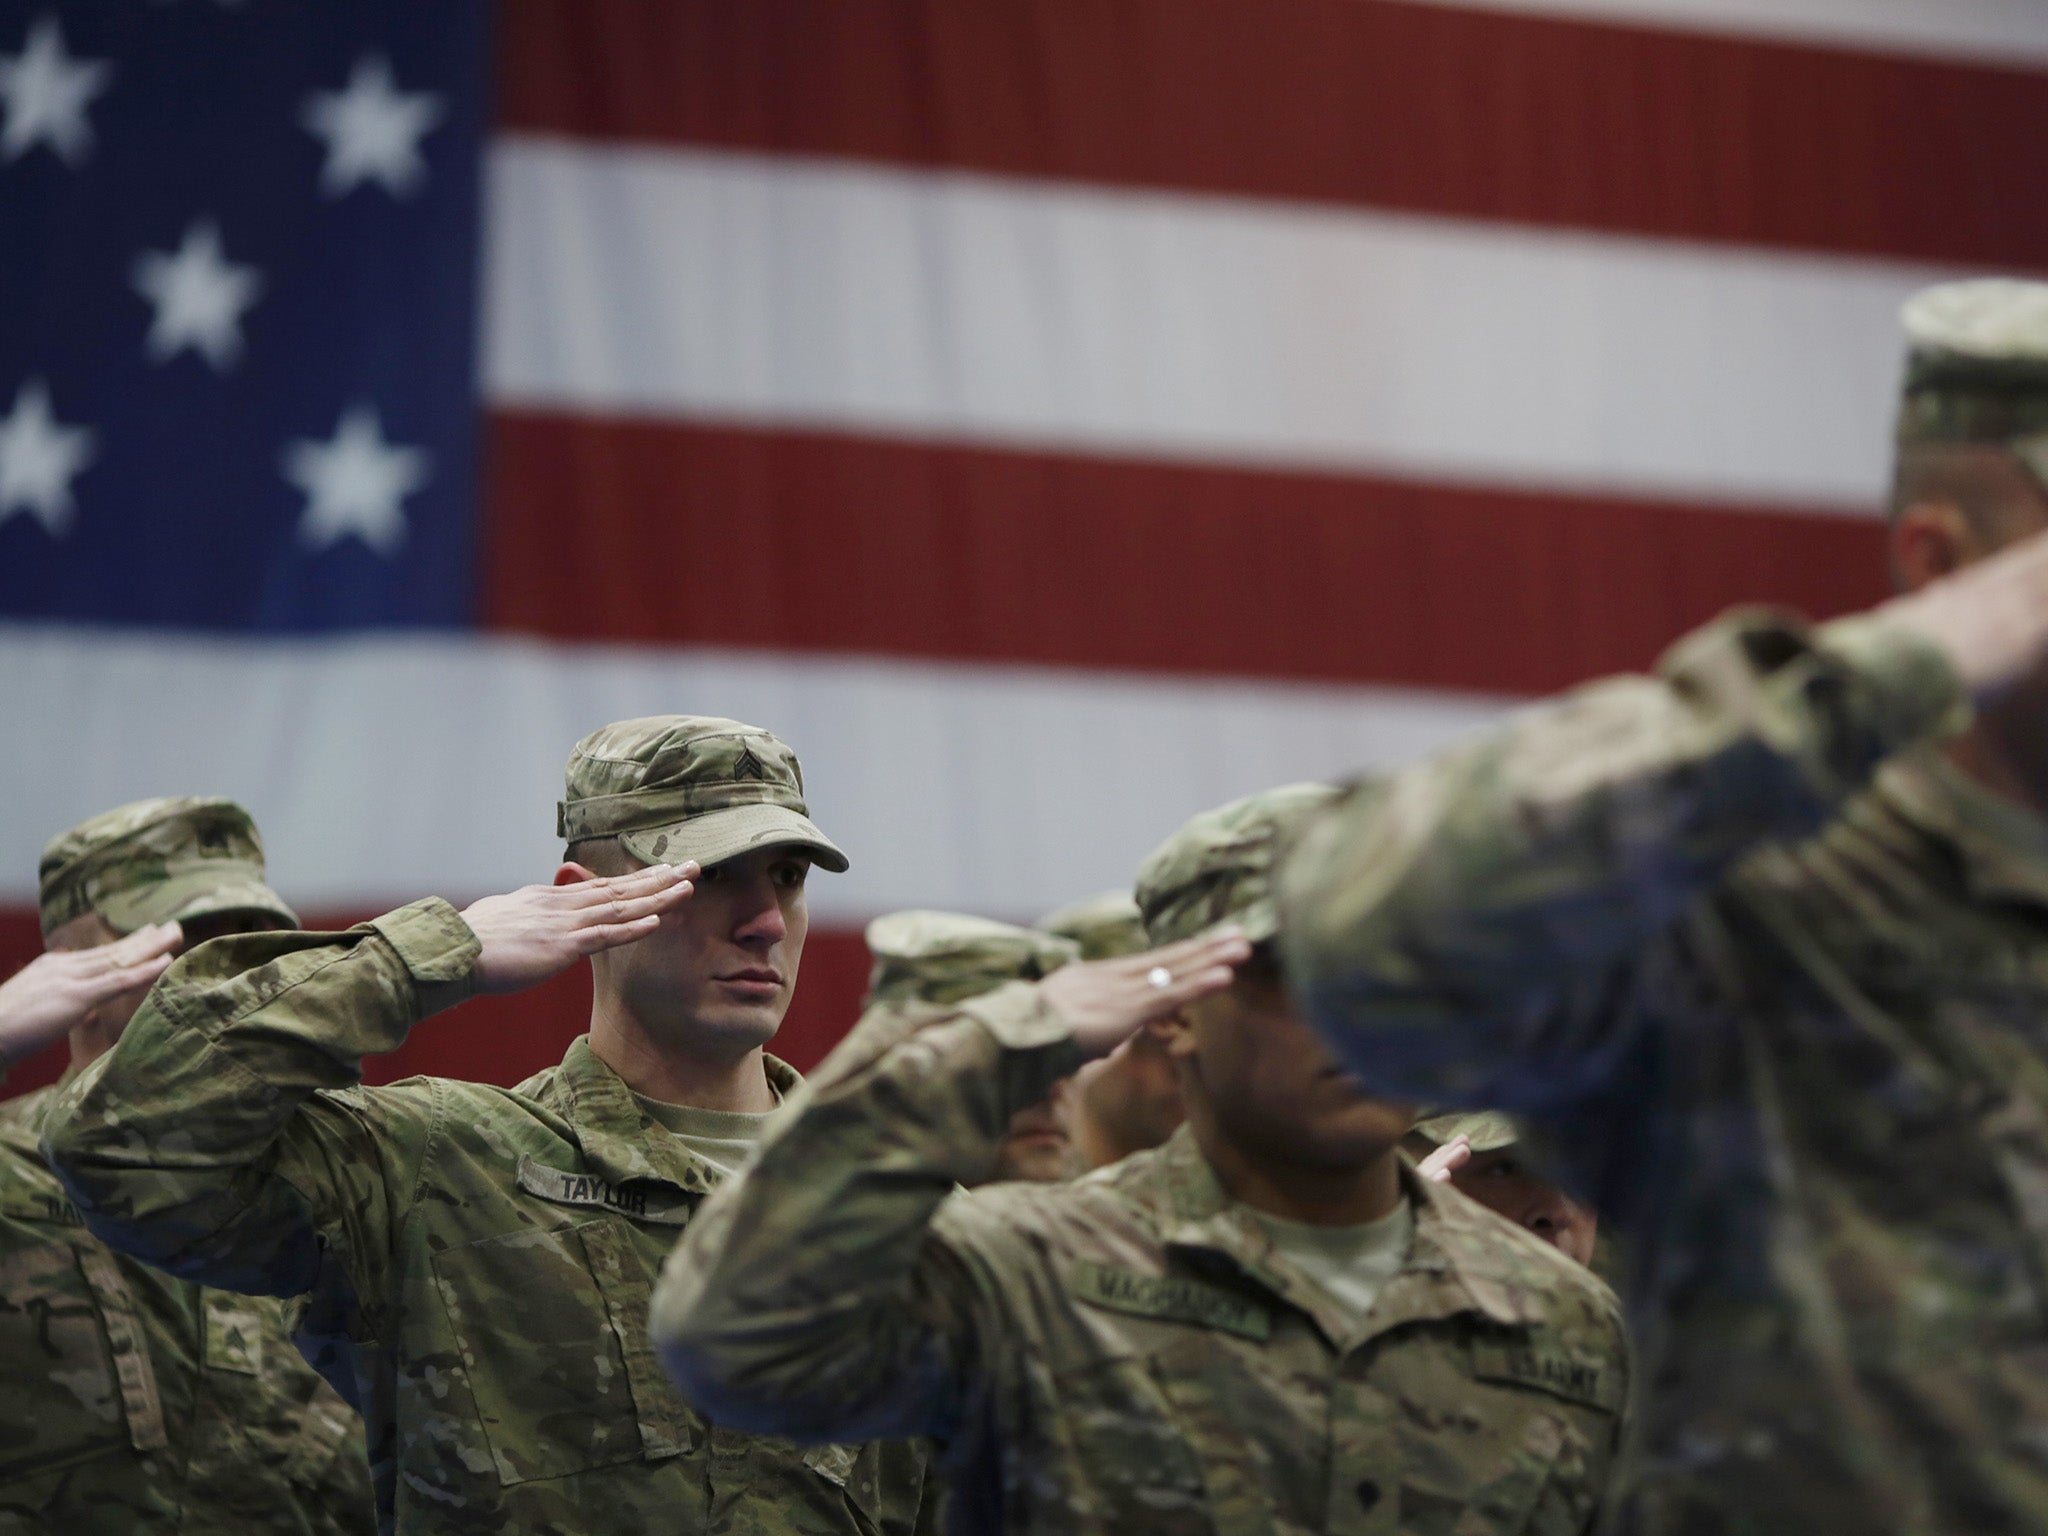 Soldiers salute during the playing of the Star Spangled Banner during a homecoming ceremony at Fort Knox, Kentucky